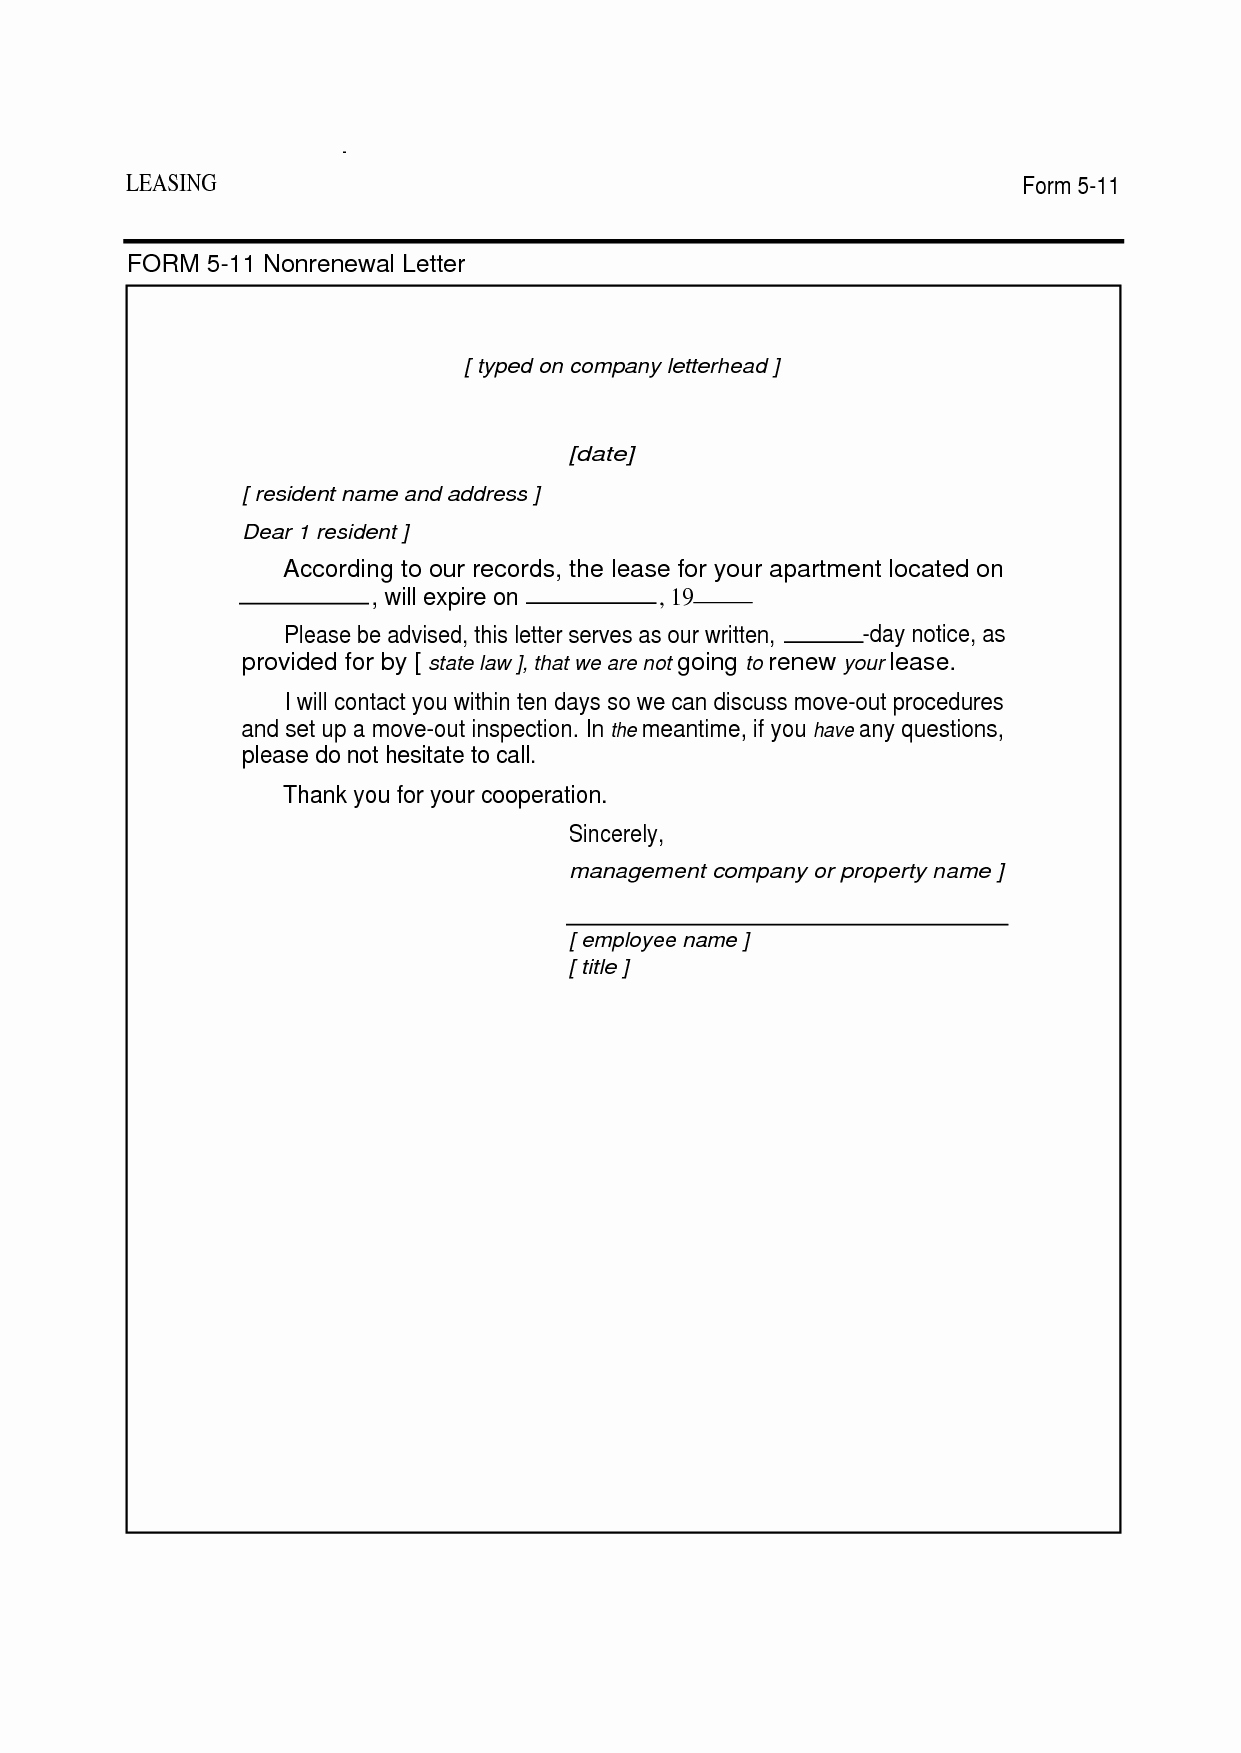 Letter for Not Renewing Lease Elegant Letter Not Renewing Lease Free Printable Documents